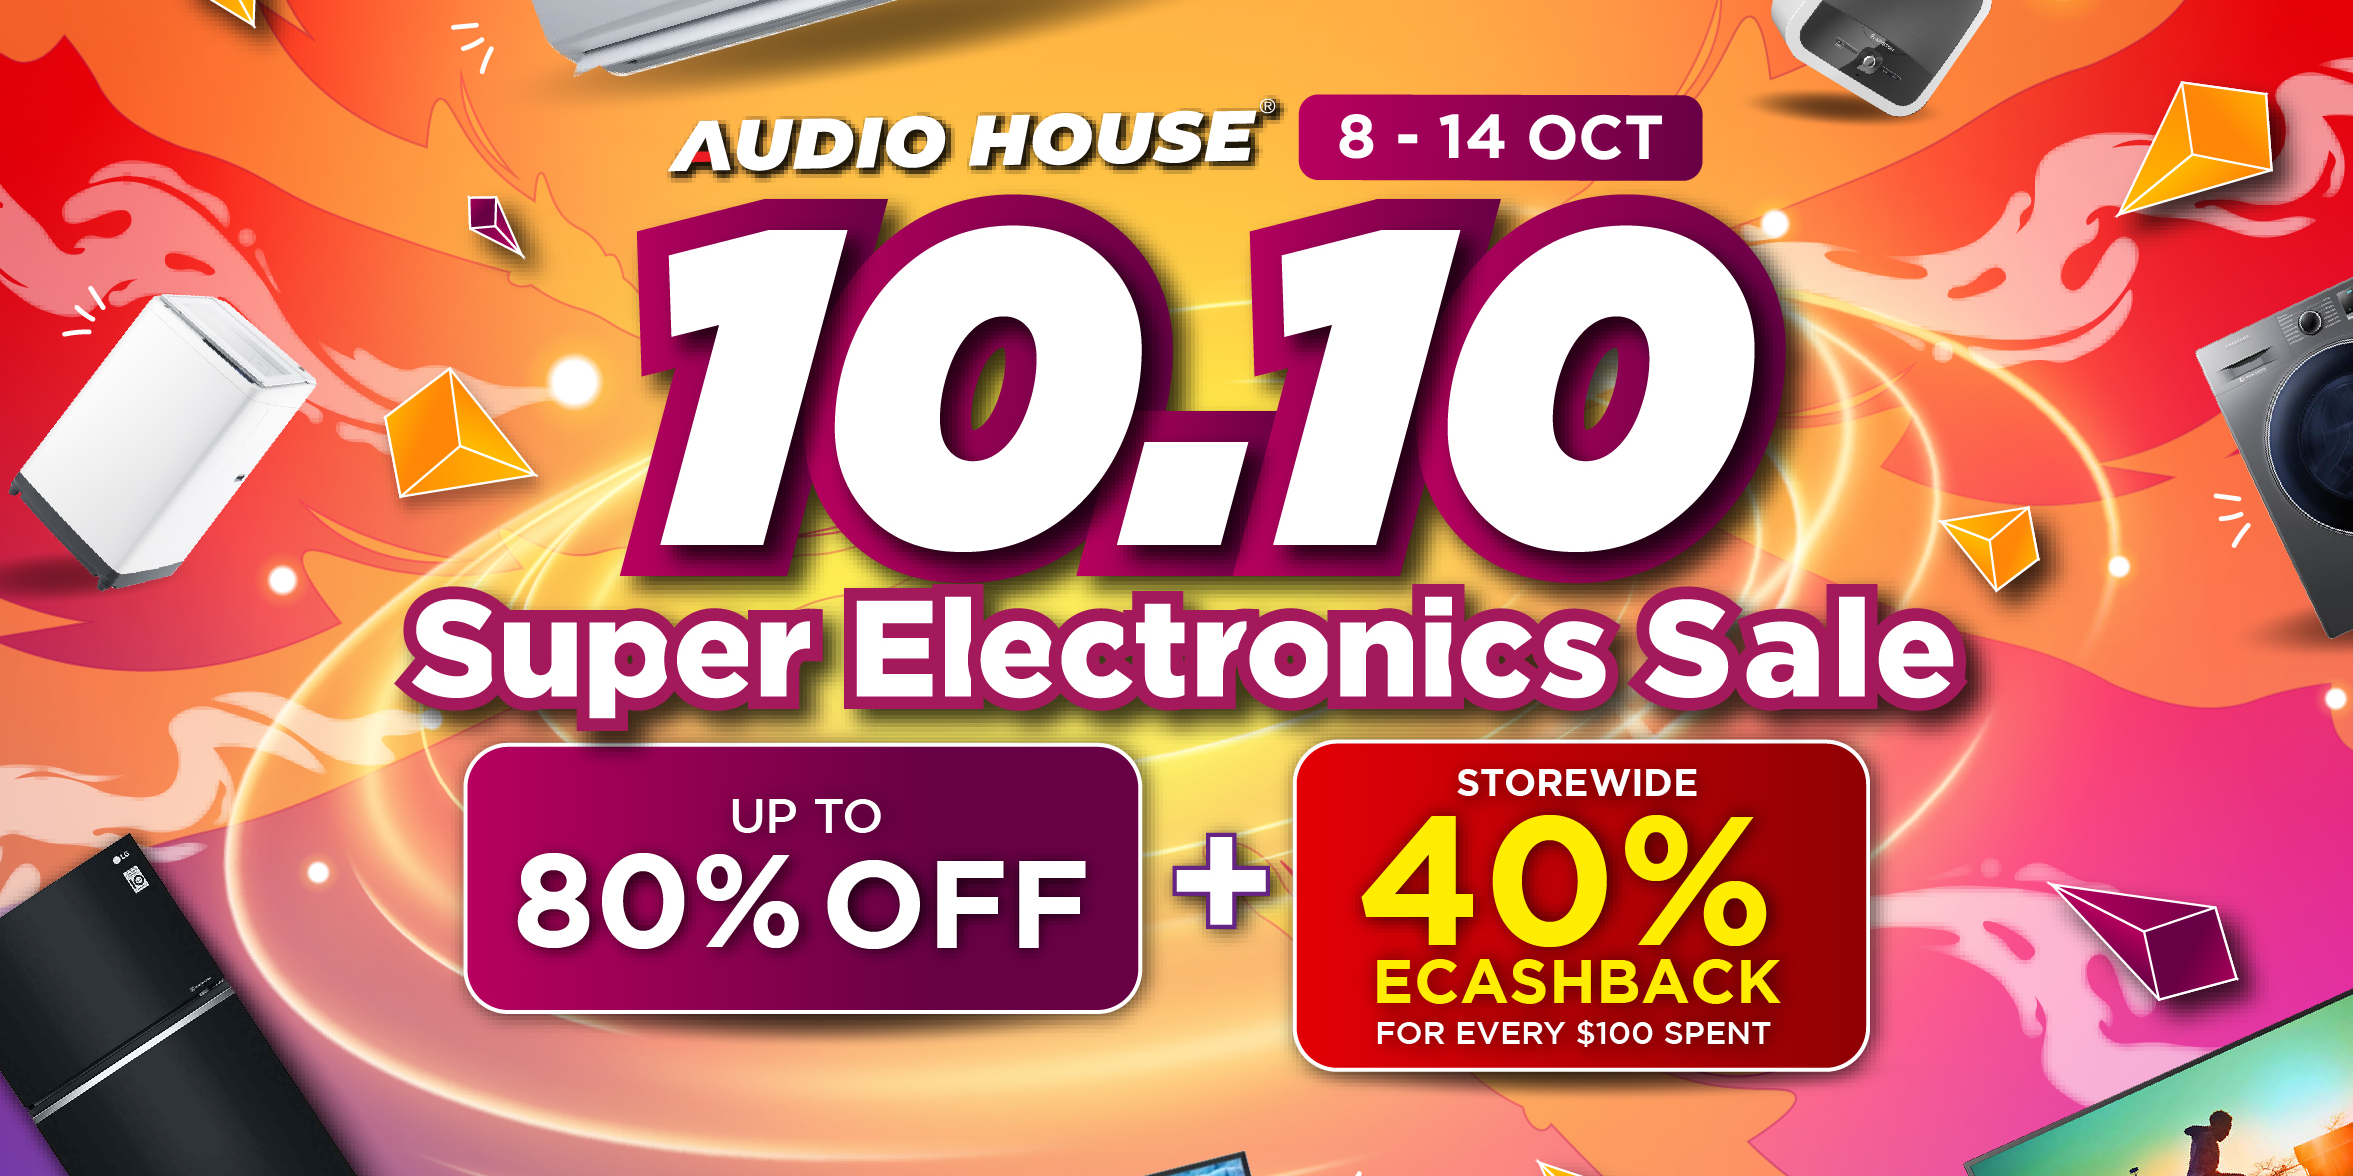 Audio House 10.10 Super Electronics Sale – Get Up to 80% OFF + Storewide 40% eCashback For Every $10